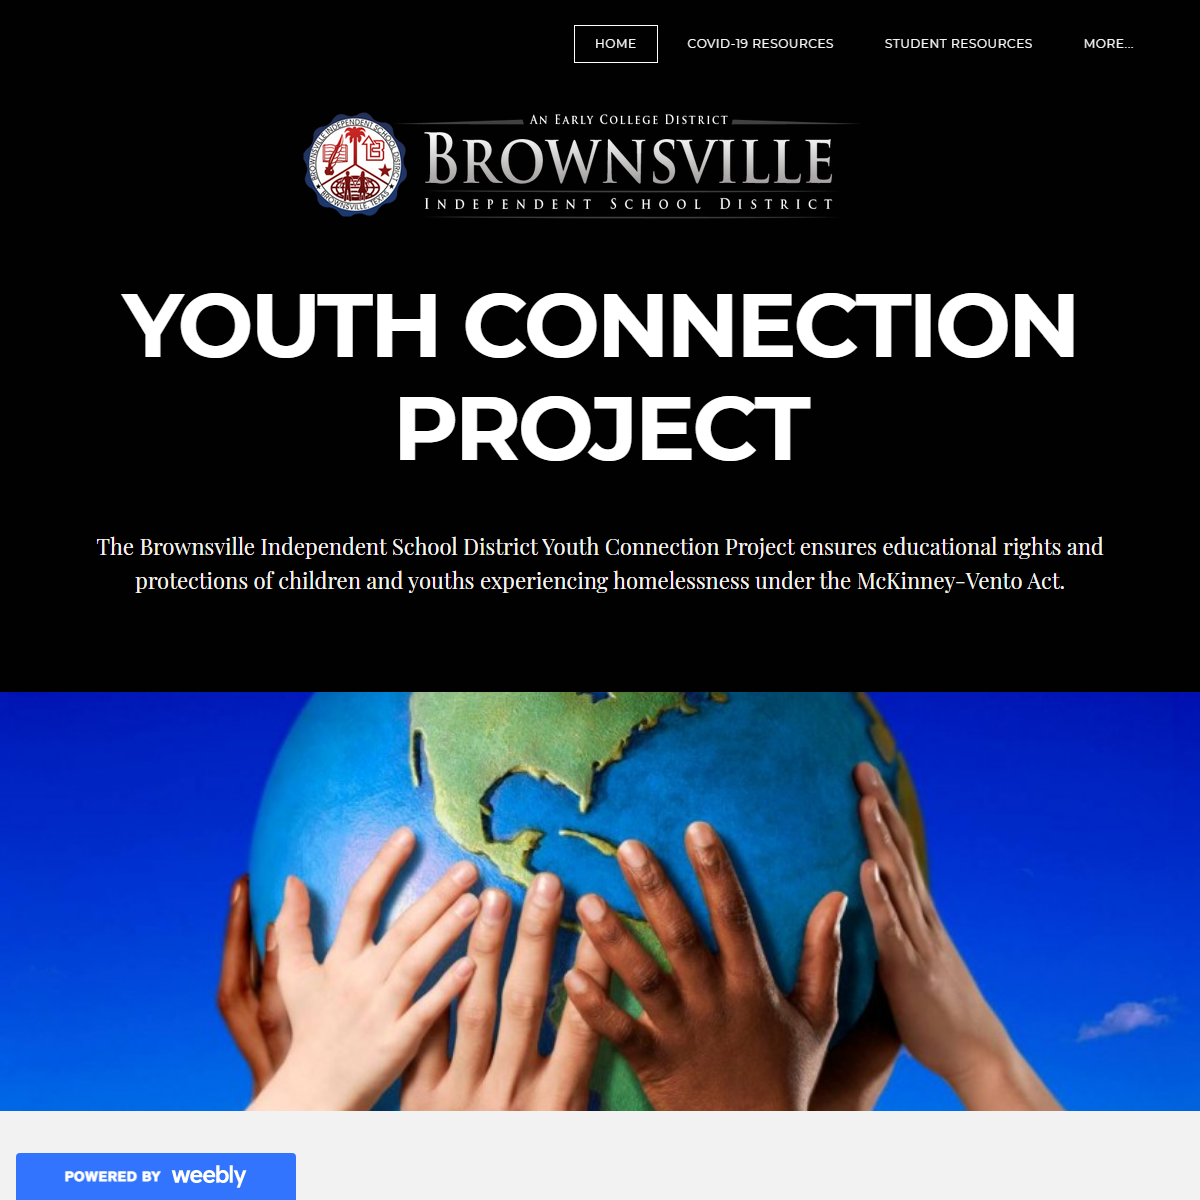 A complete backup of https://youthconnectionprojectbisd.weebly.com/